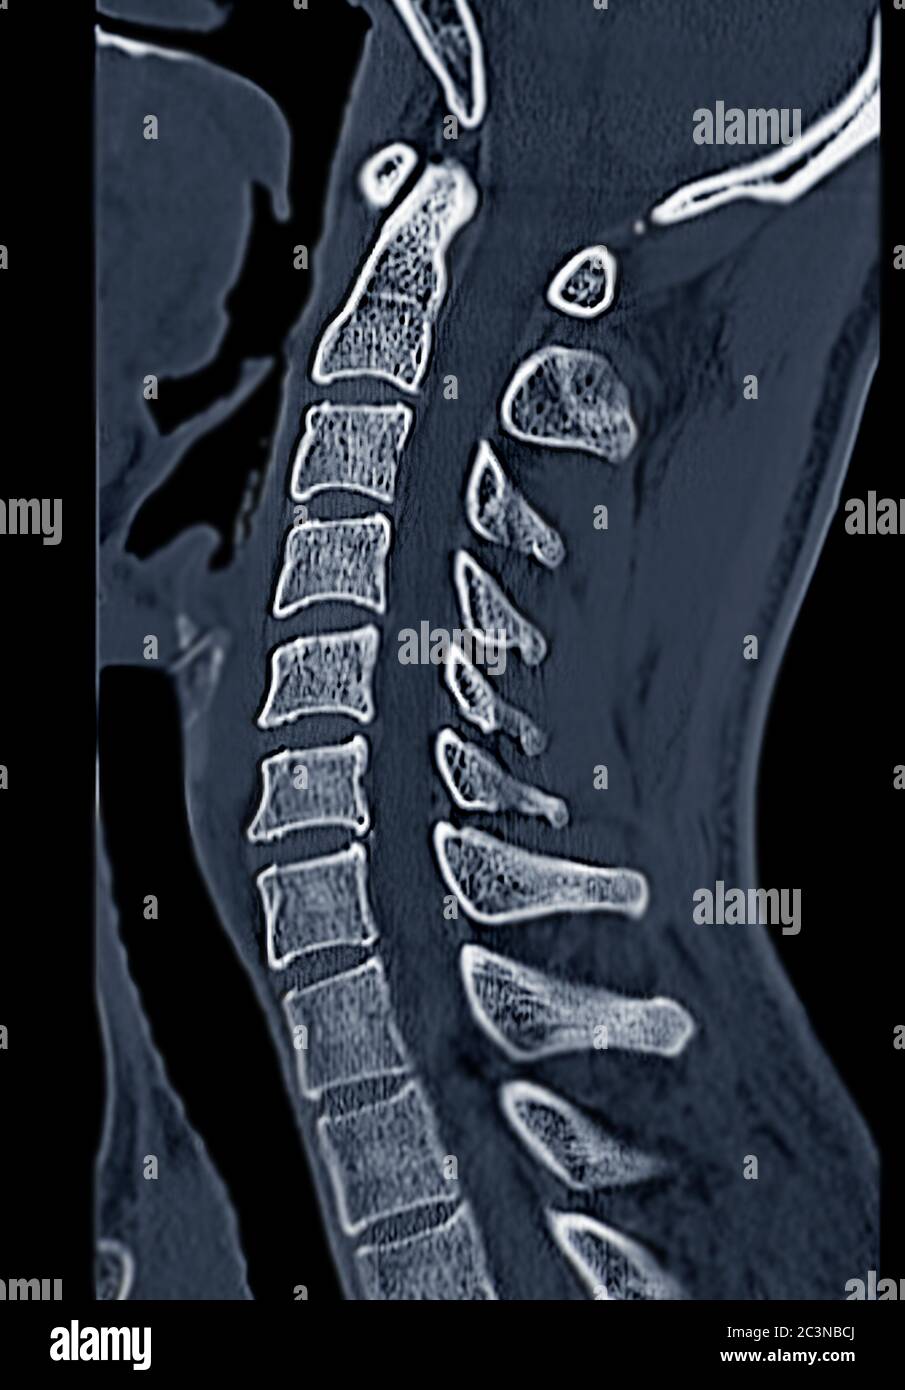 CT C-Spine or Cervical spine  sagittal  view in patient trauma cervical spine injury. Stock Photo